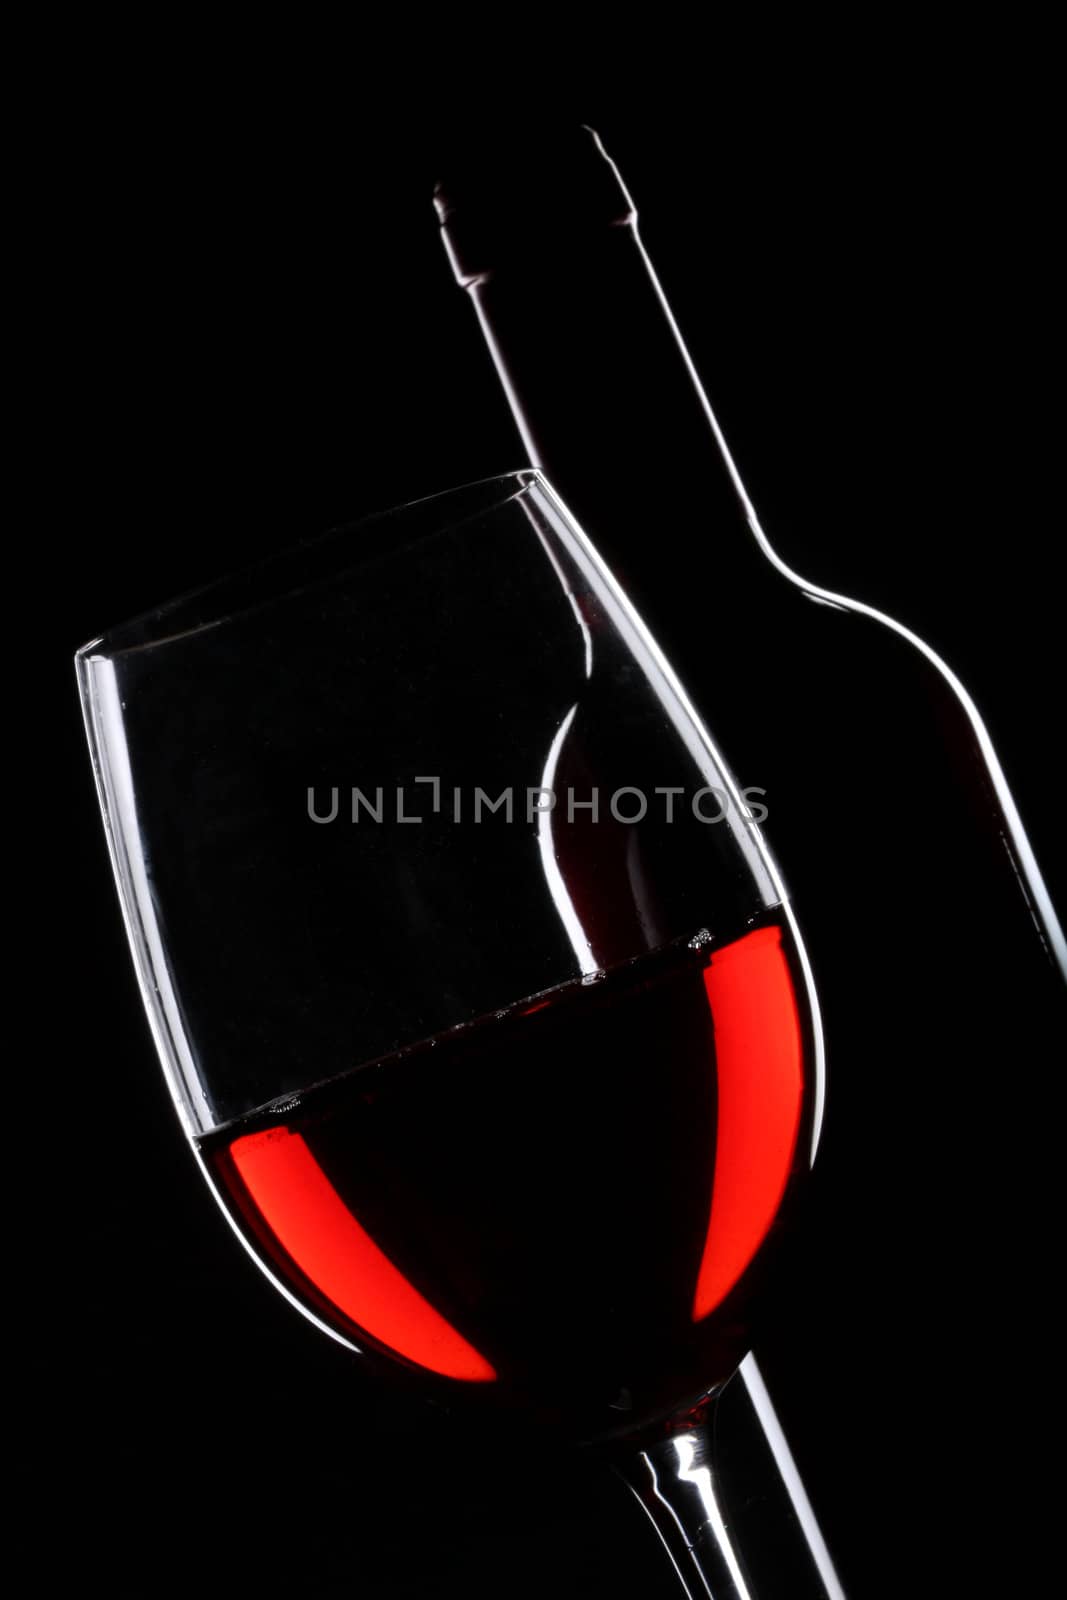 Red wine bottle and glass by Erdosain